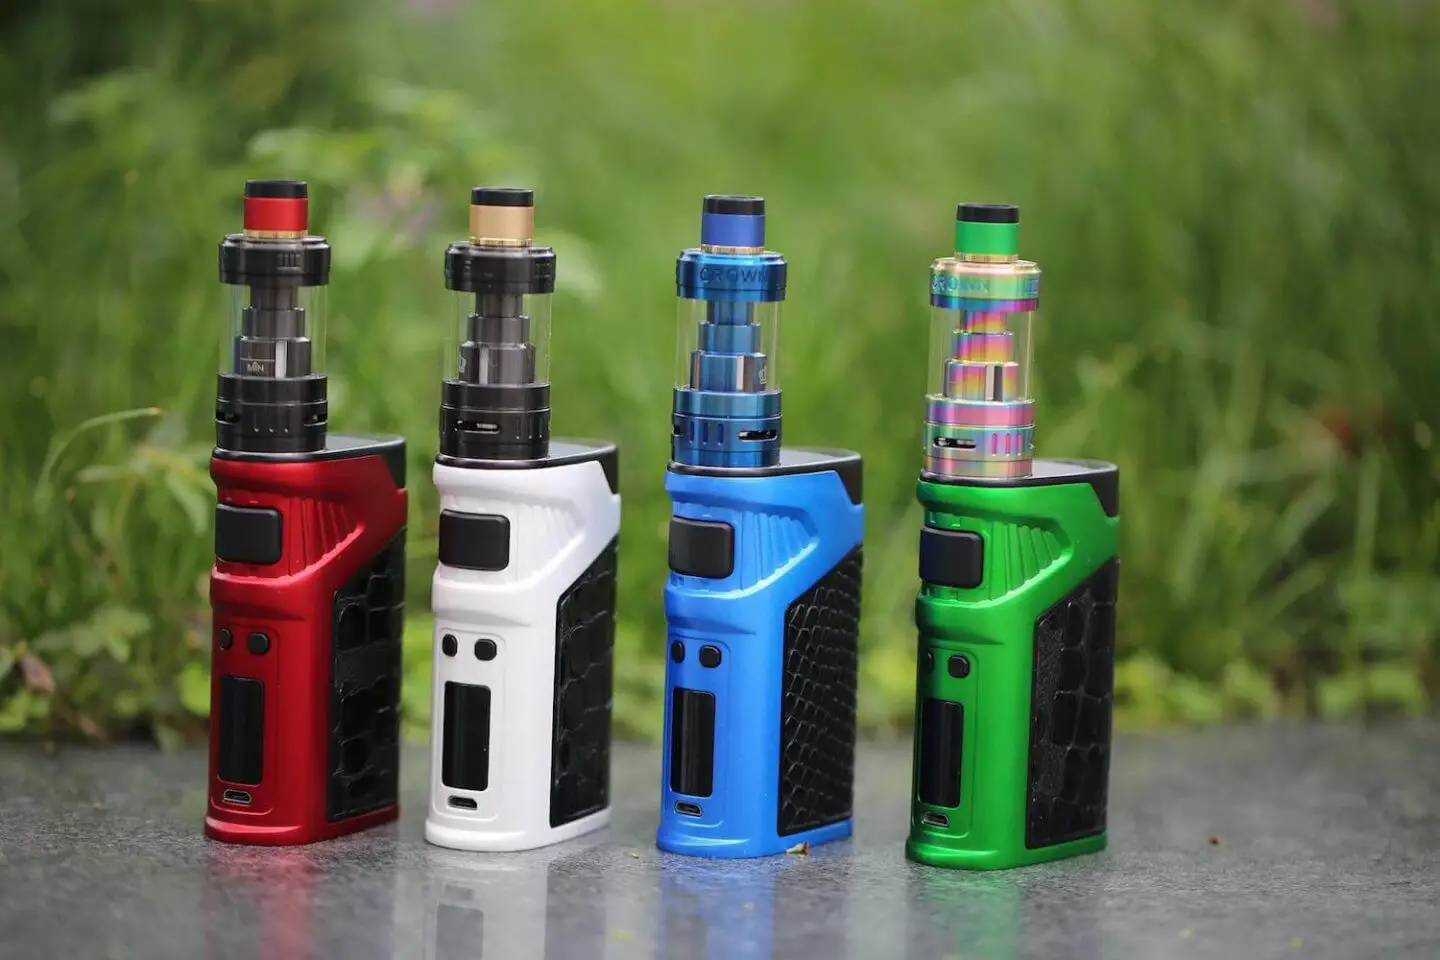 4 vape devices in different colours